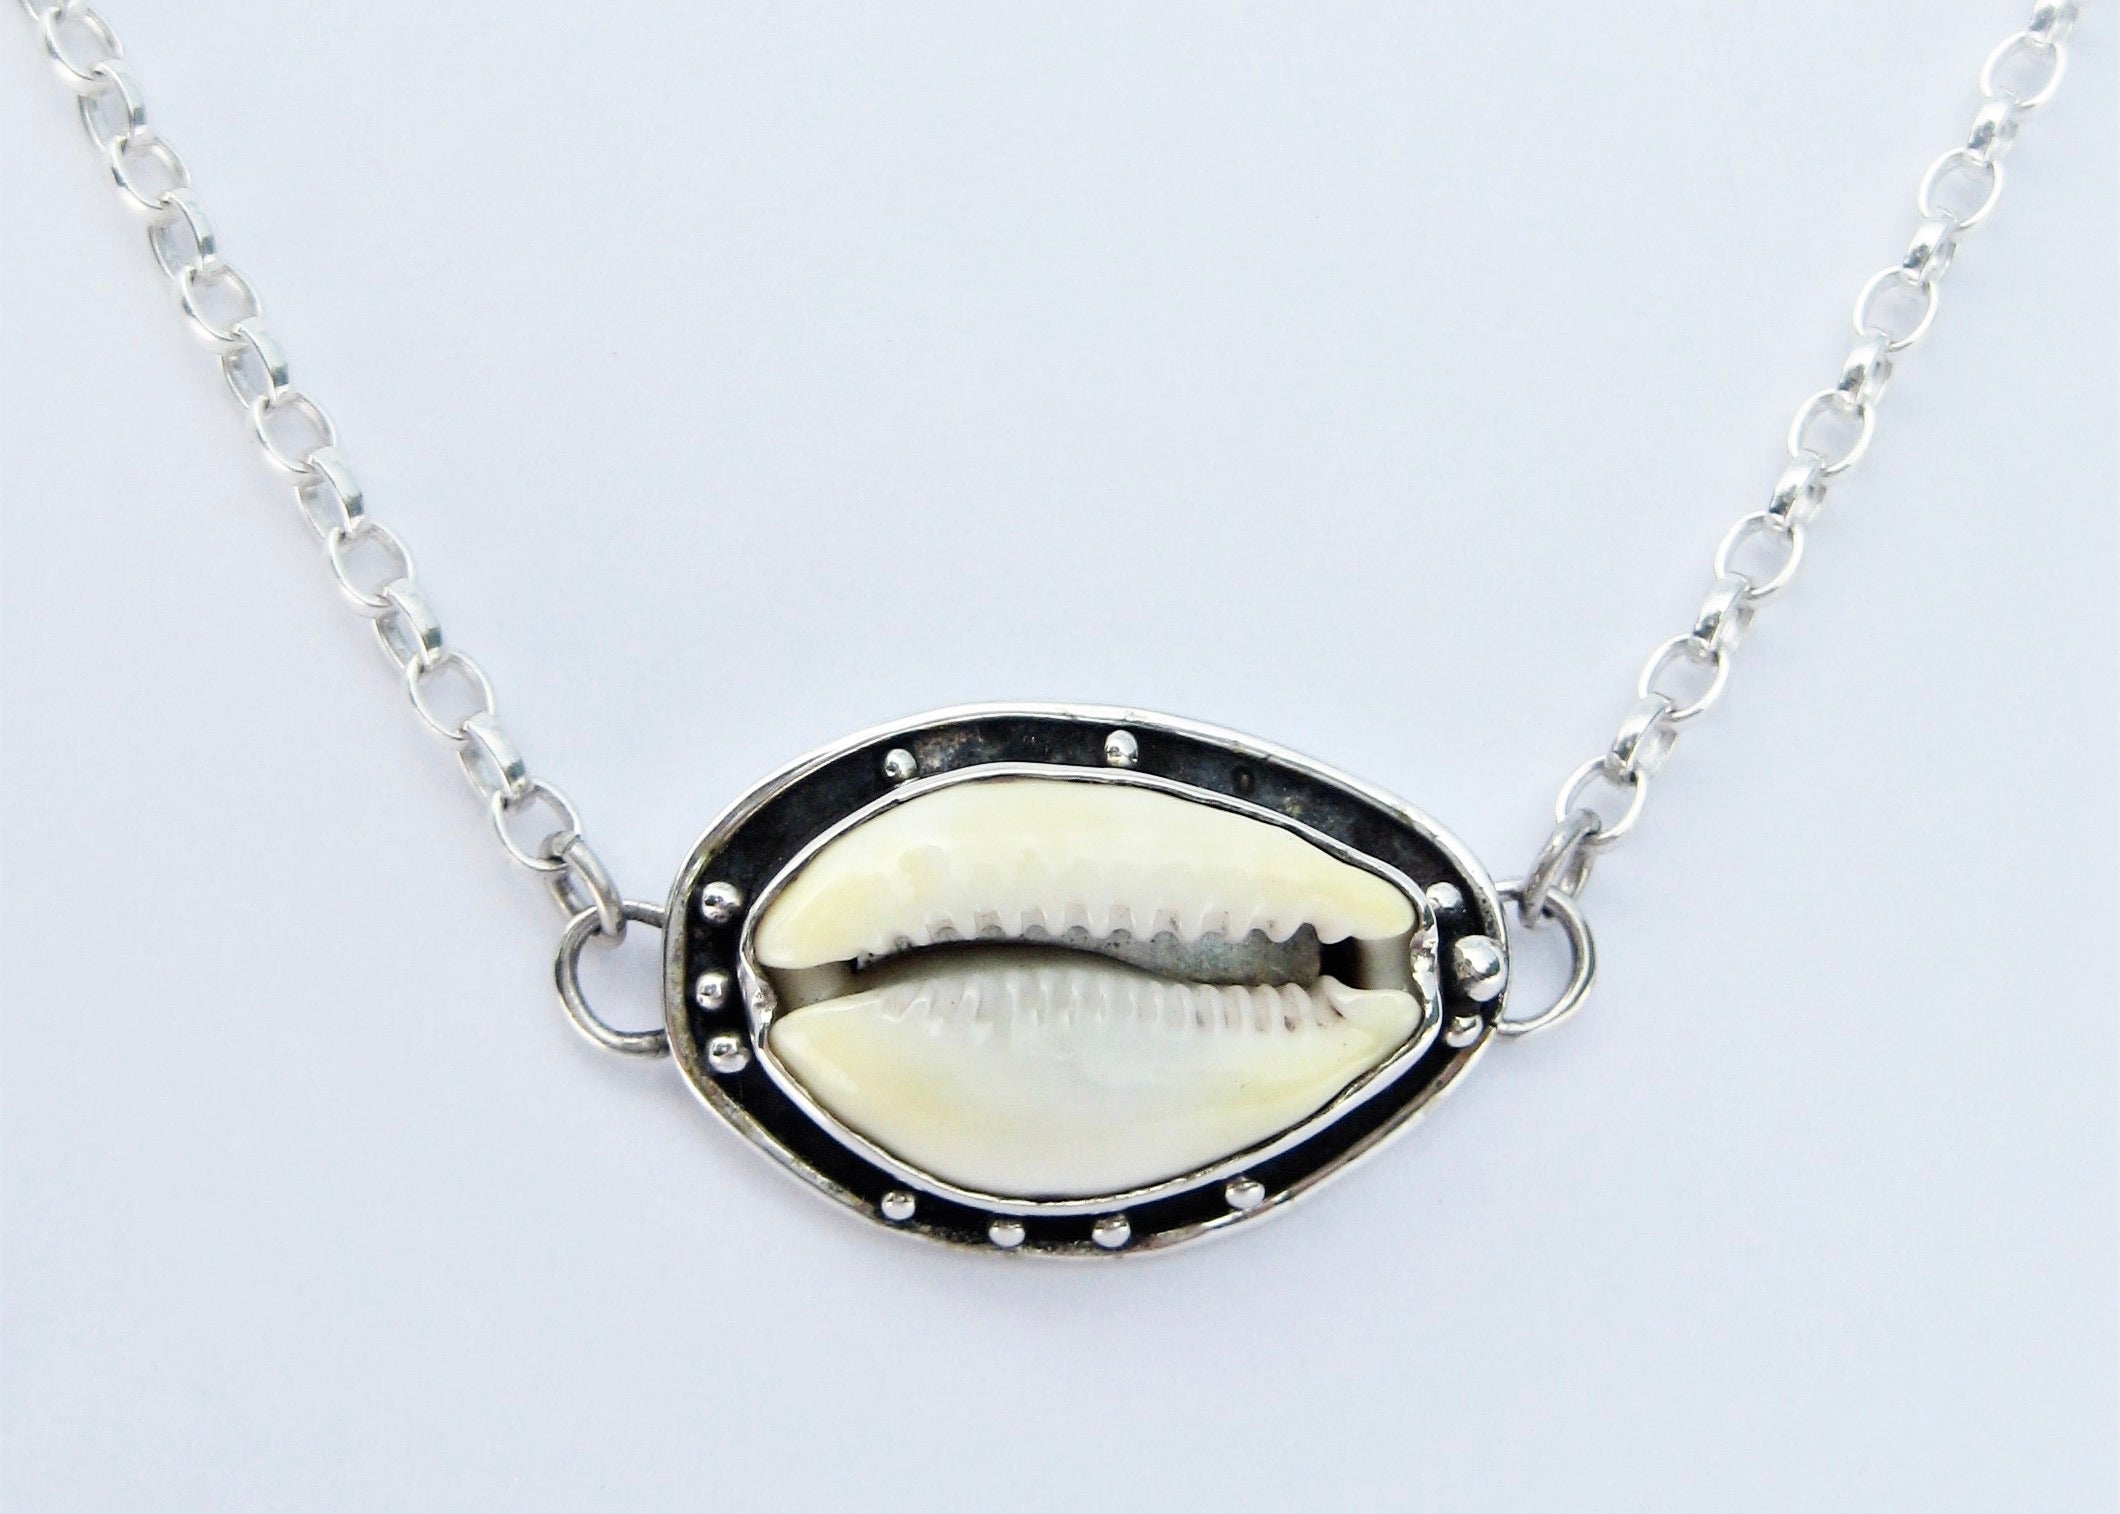 Cowrie Shell with Oxidised Edge Pendant